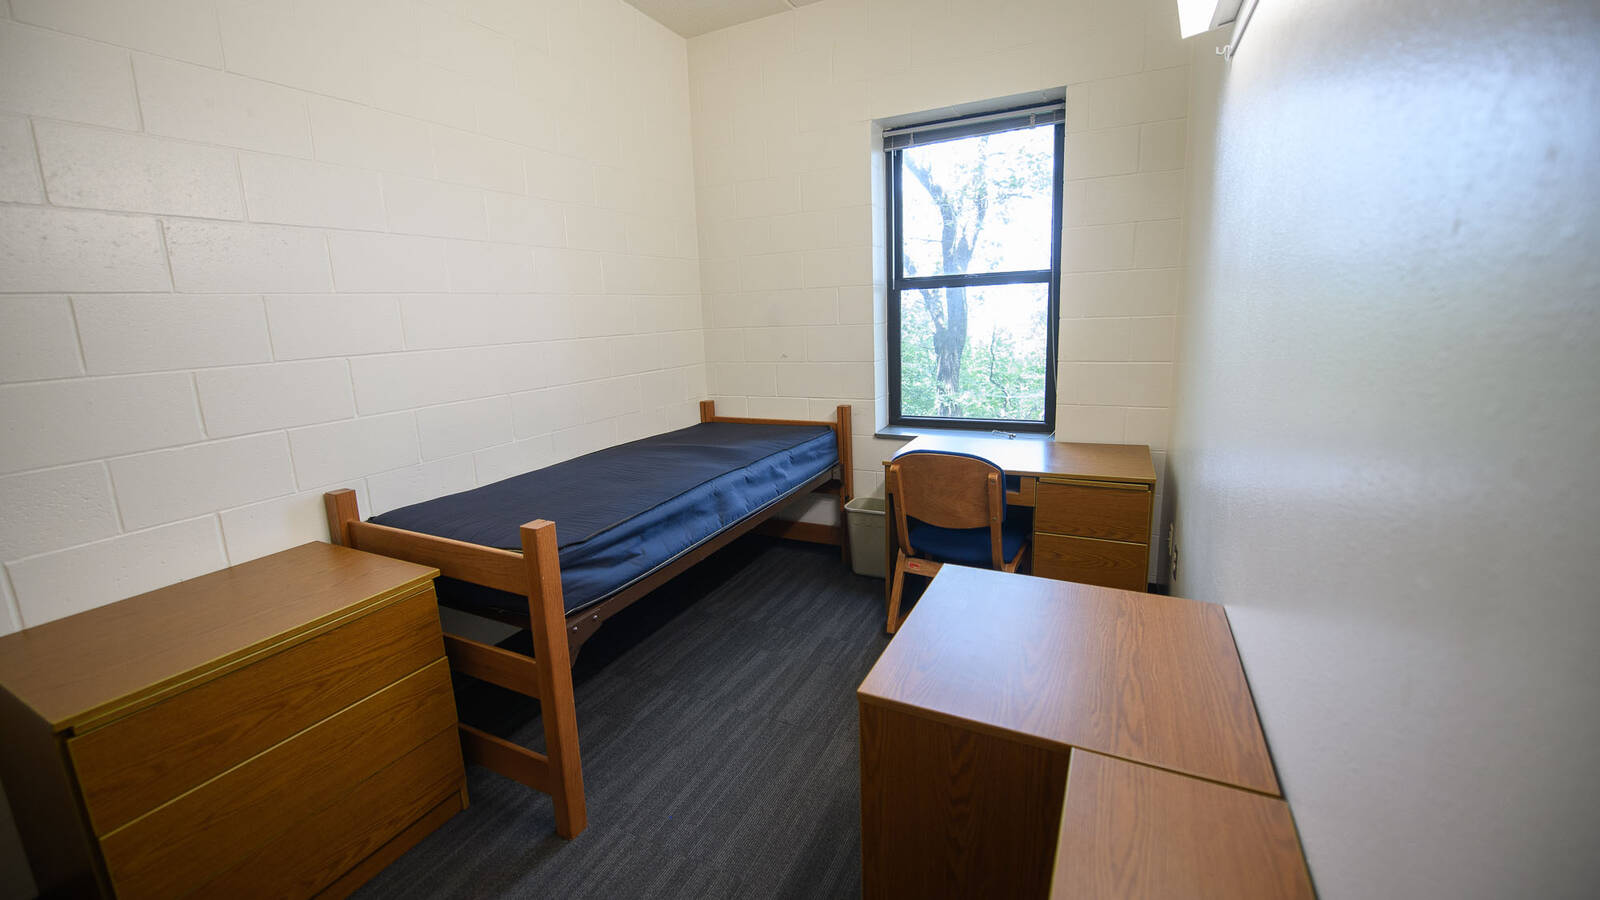 Single bedroom in Chancellors Hall apartment with bed, window, desk, chair, bookshelves, and dresser.